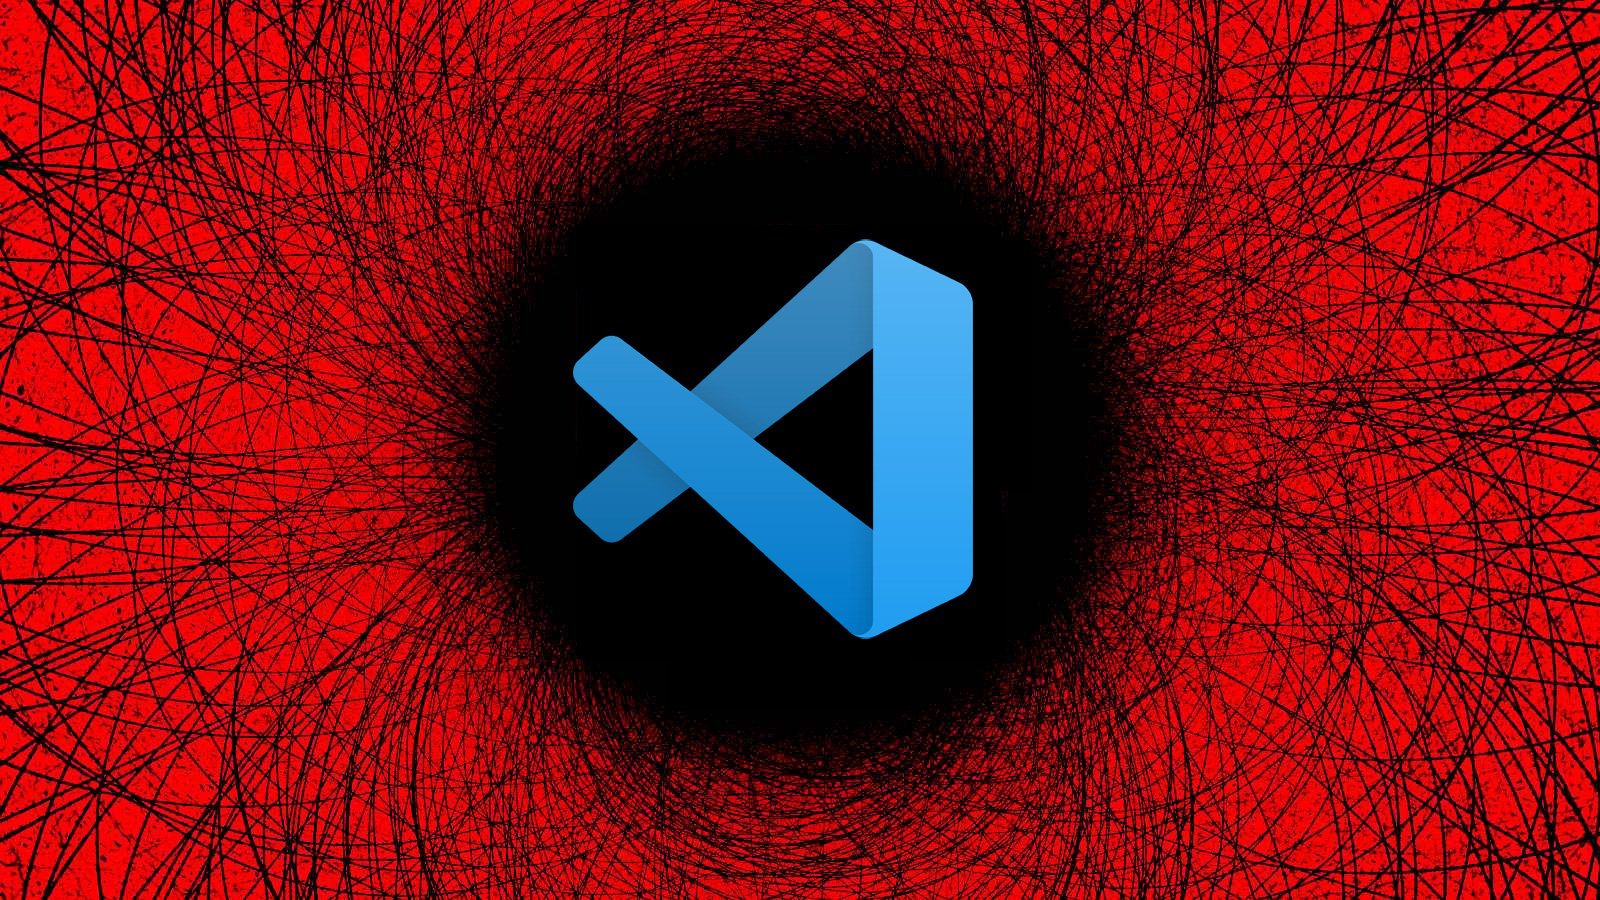 Microsoft Visual Studio Code flaw lets extensions steal passwords – Source: www.bleepingcomputer.com